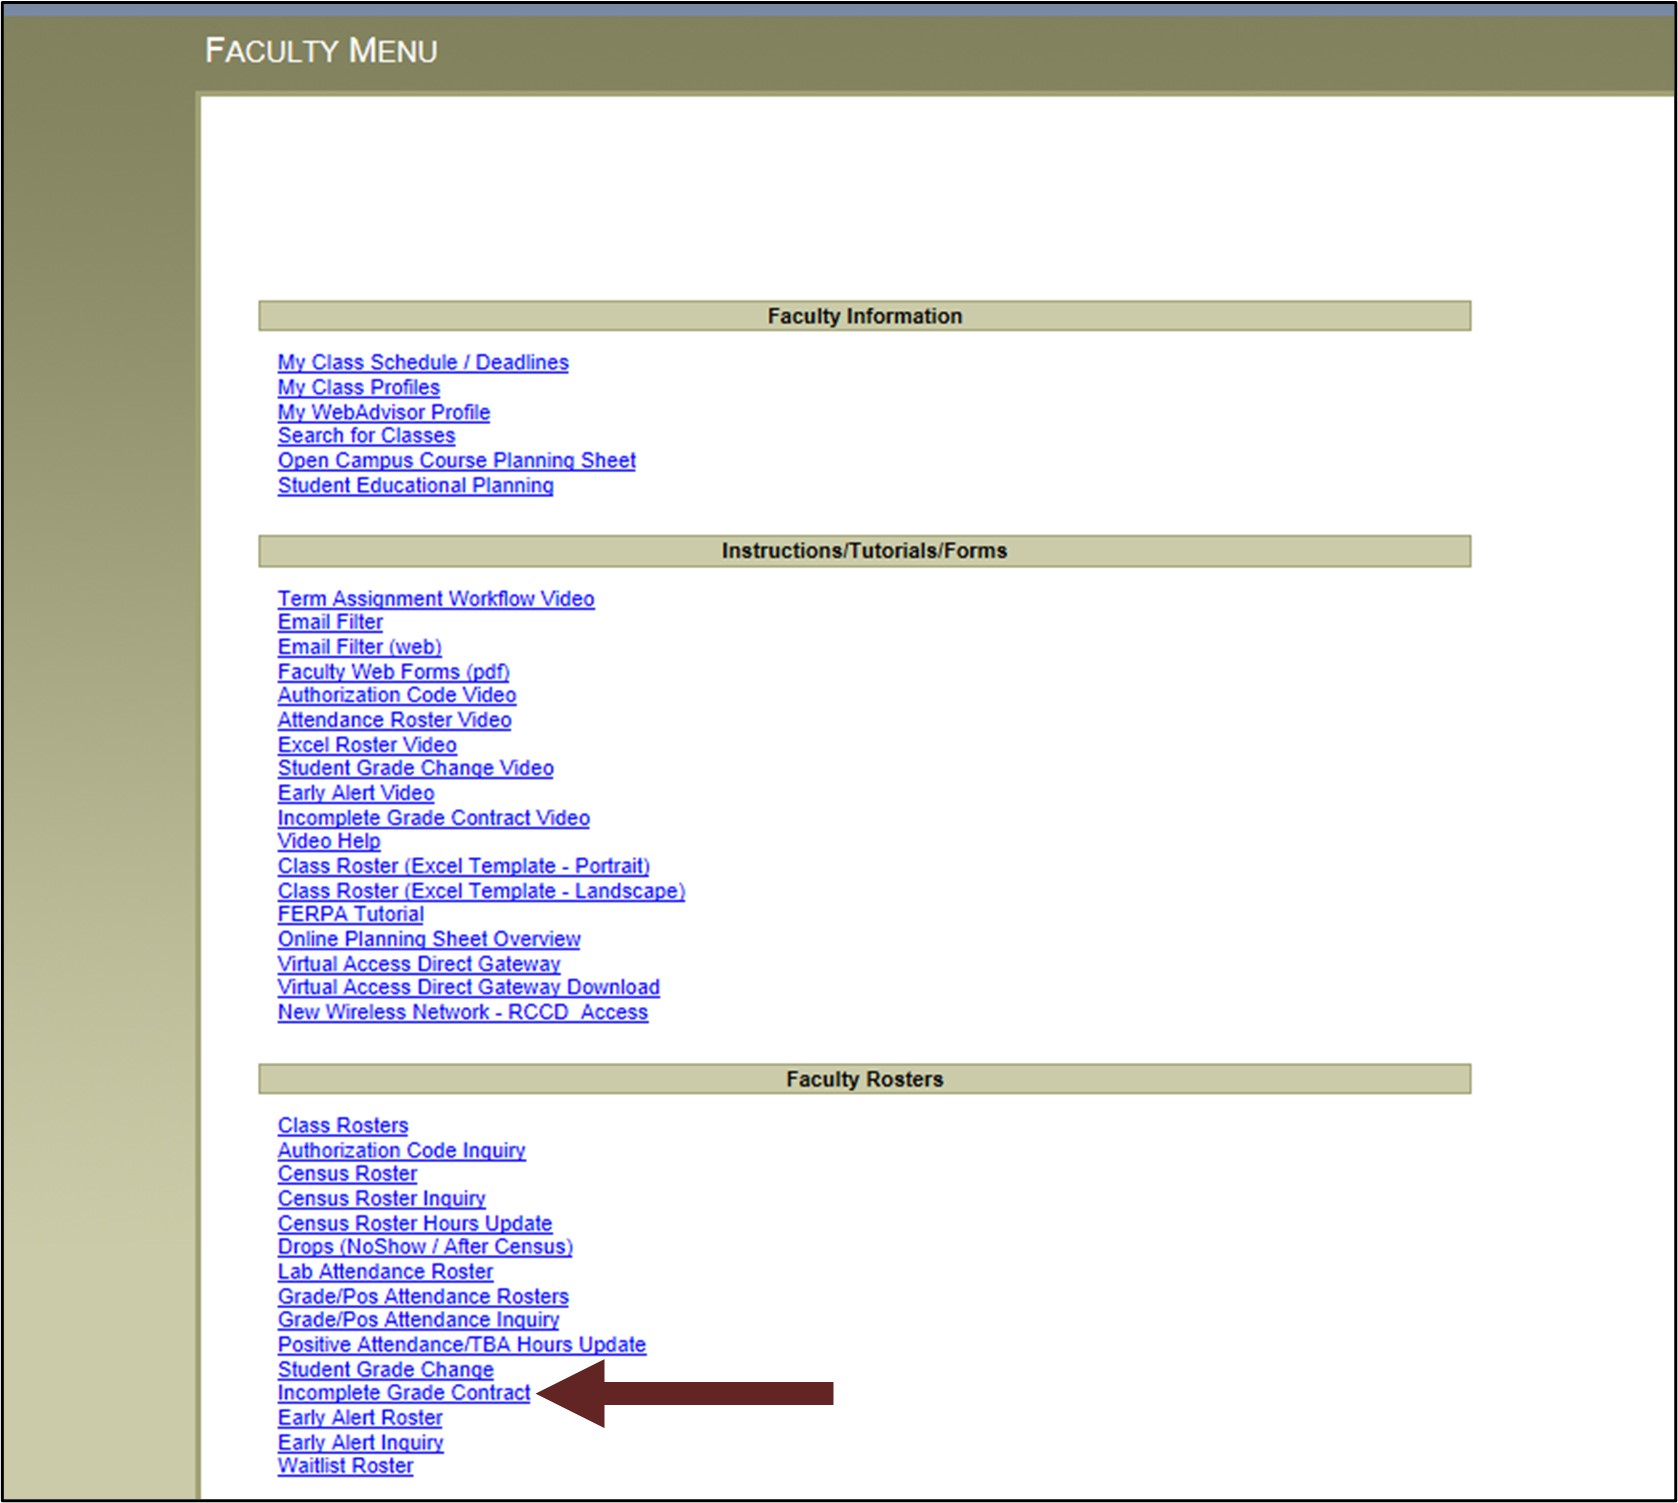 WebAdvisor Faculty Menu with arrow pointing at Incomplete Grade Contract